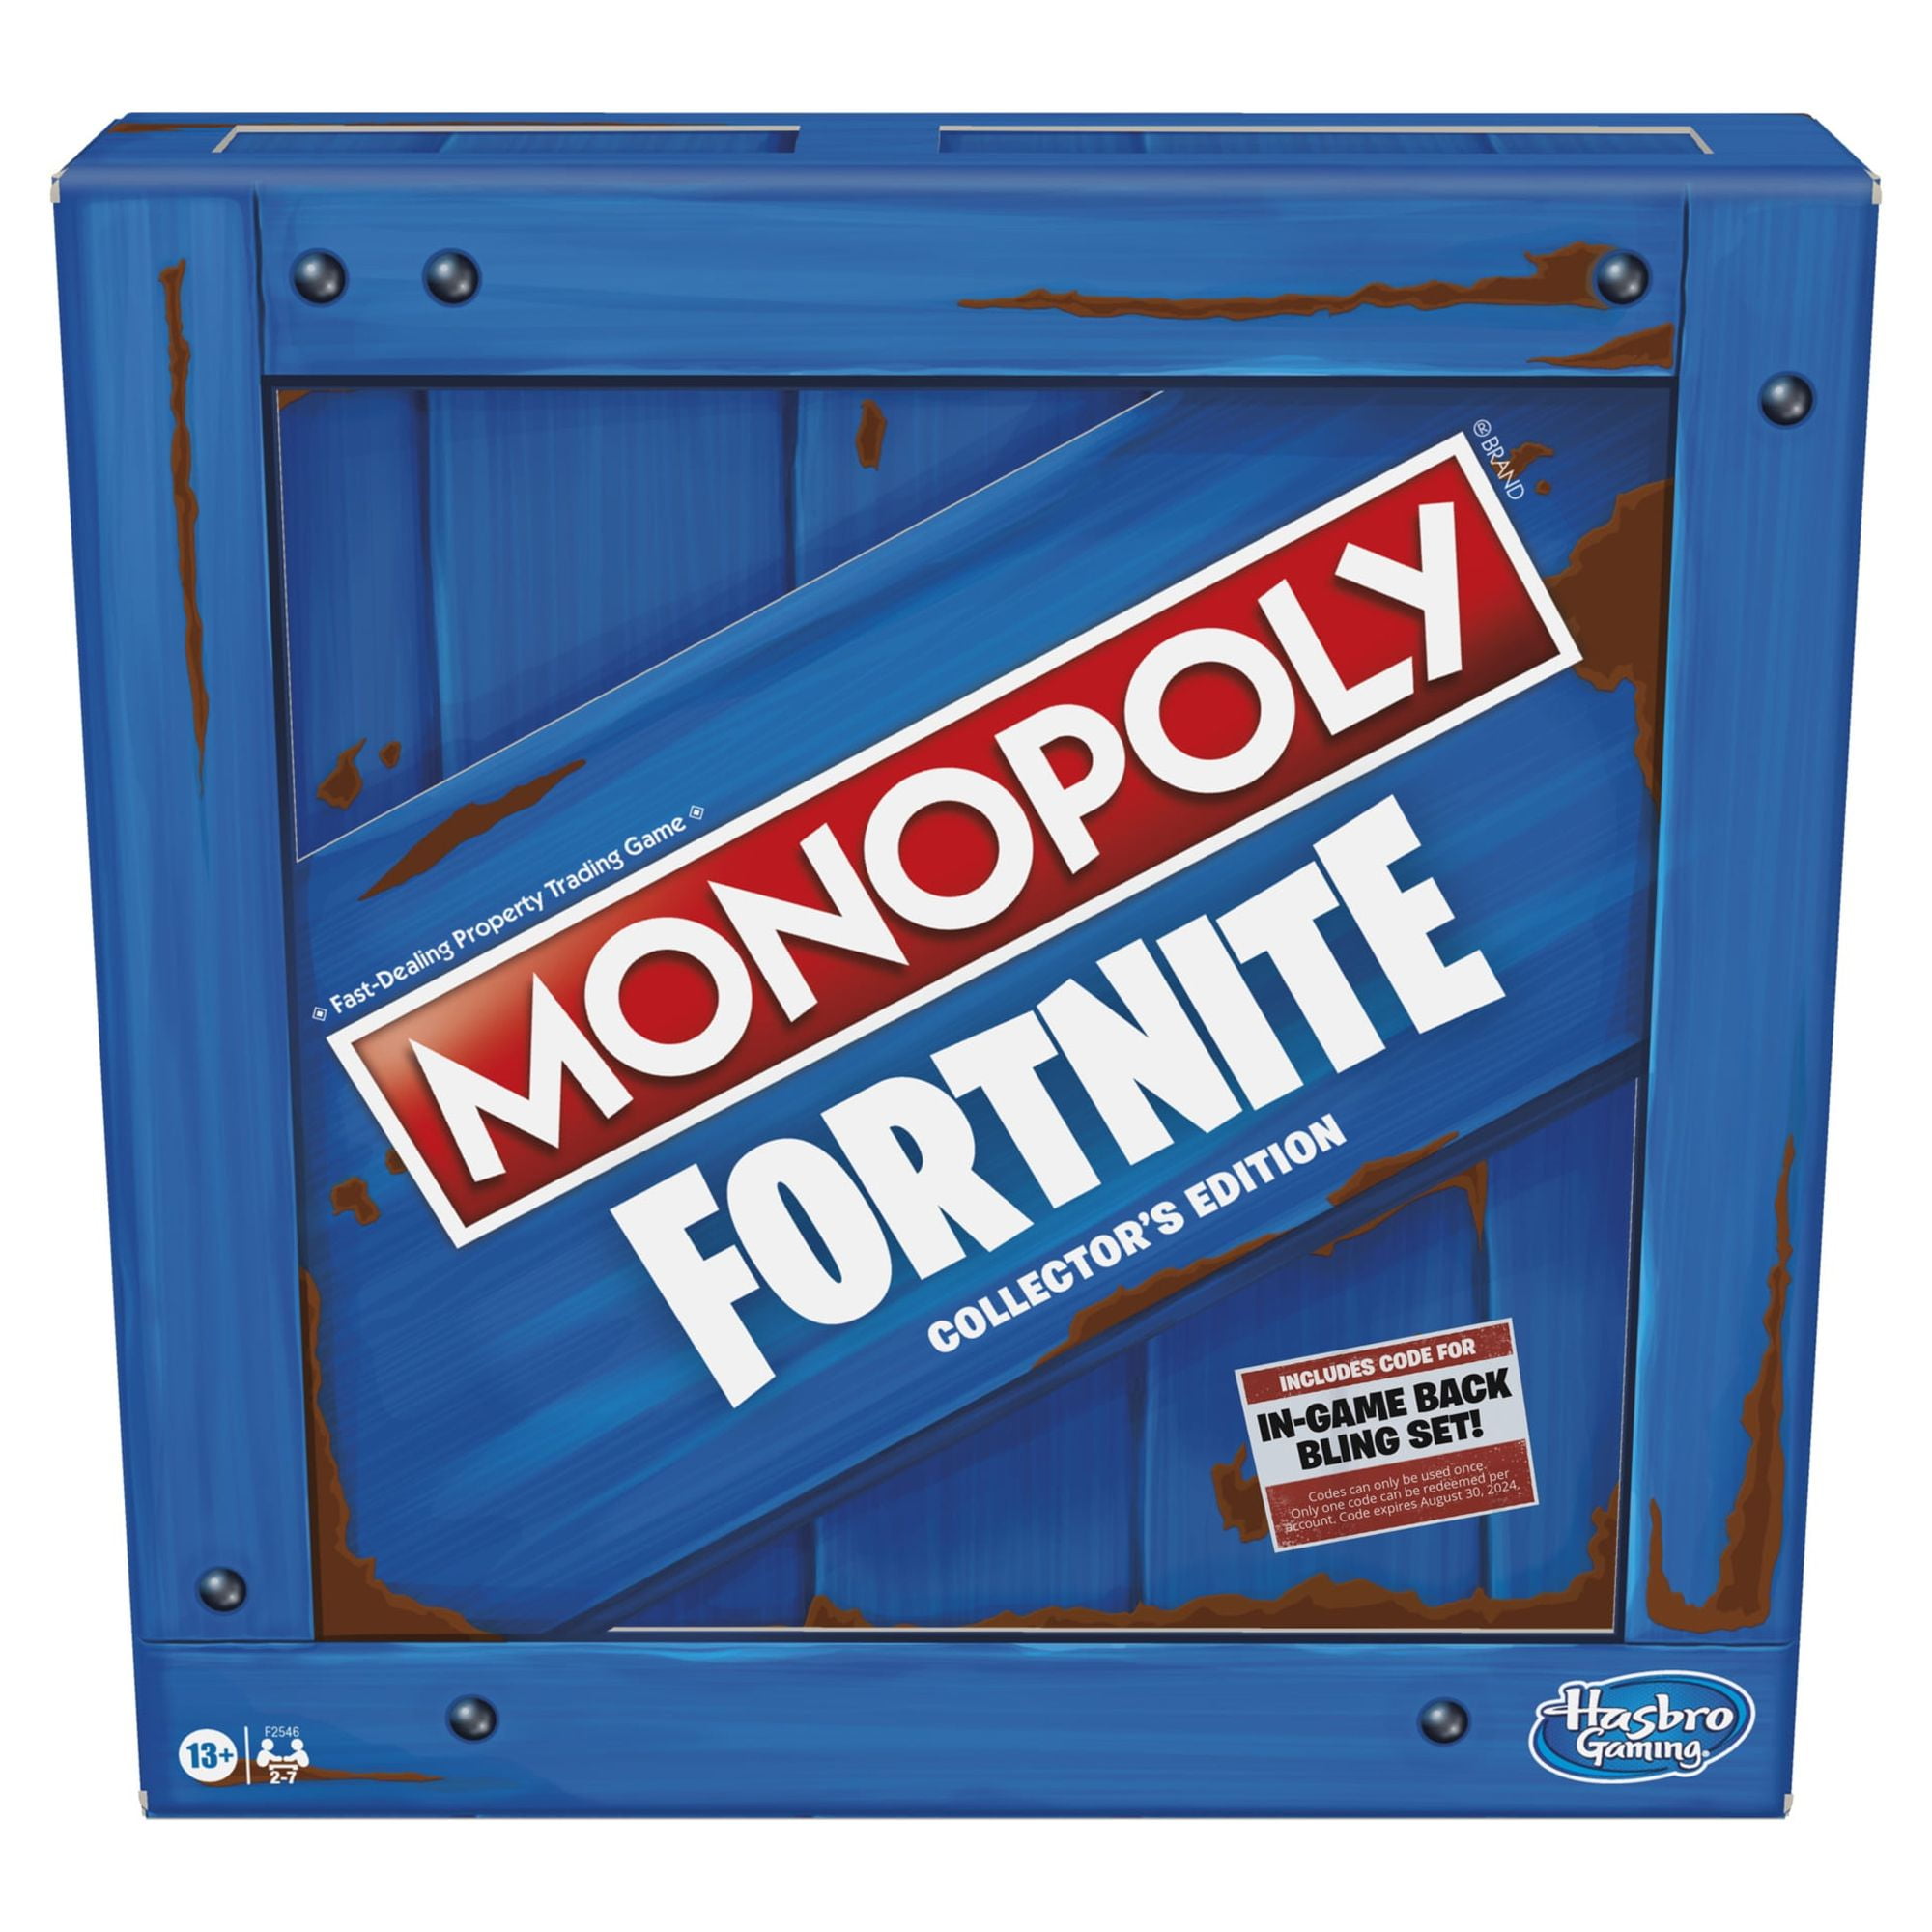 New Hasbro Gaming Fortnite - Monopoly Fortnite Collectors Limited Edition.